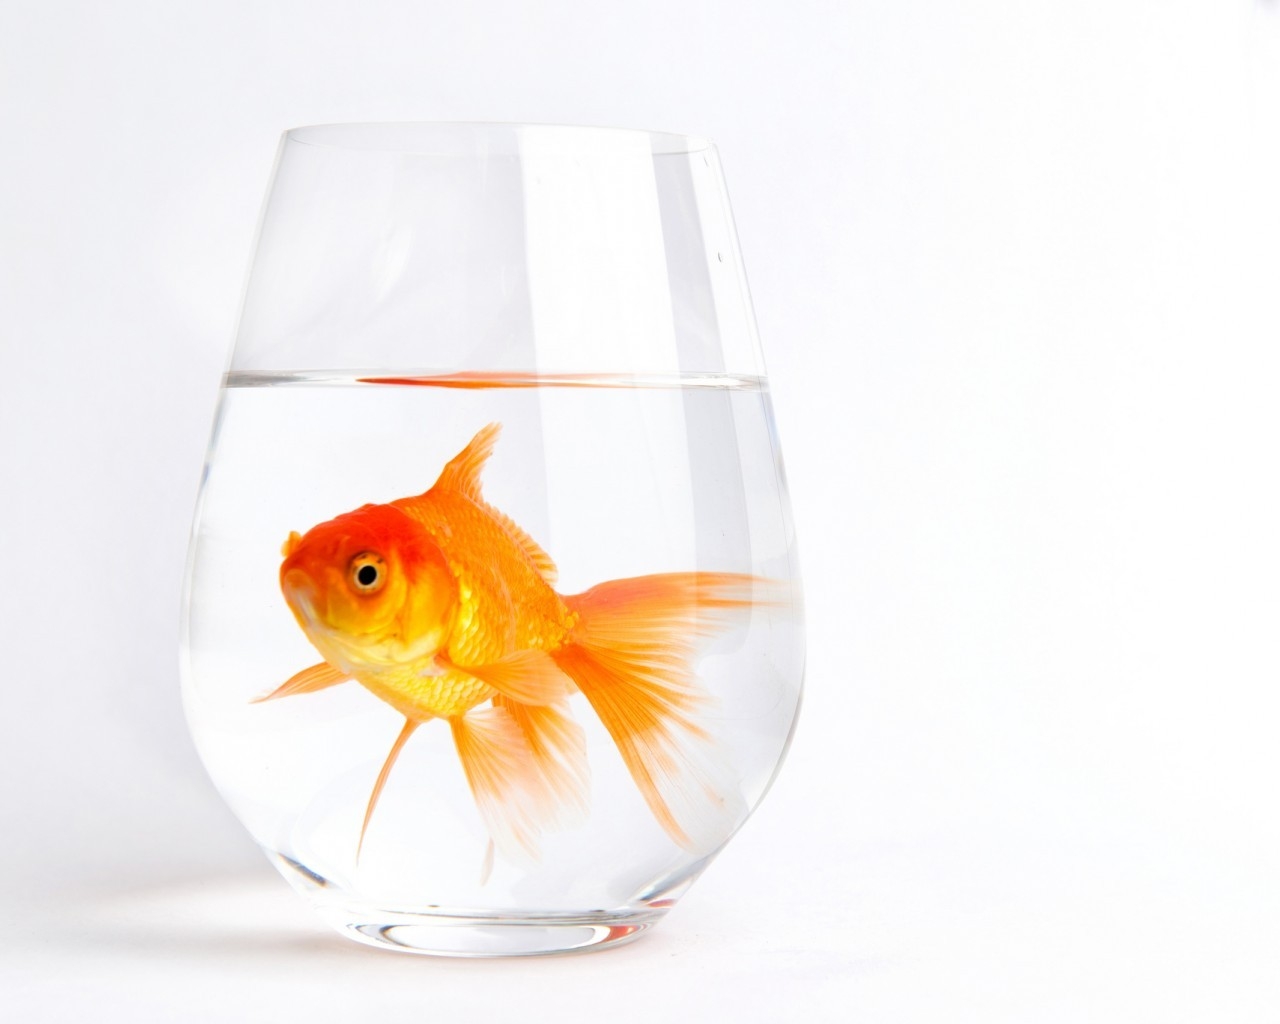 Lonely Gold Fish for 1280 x 1024 resolution